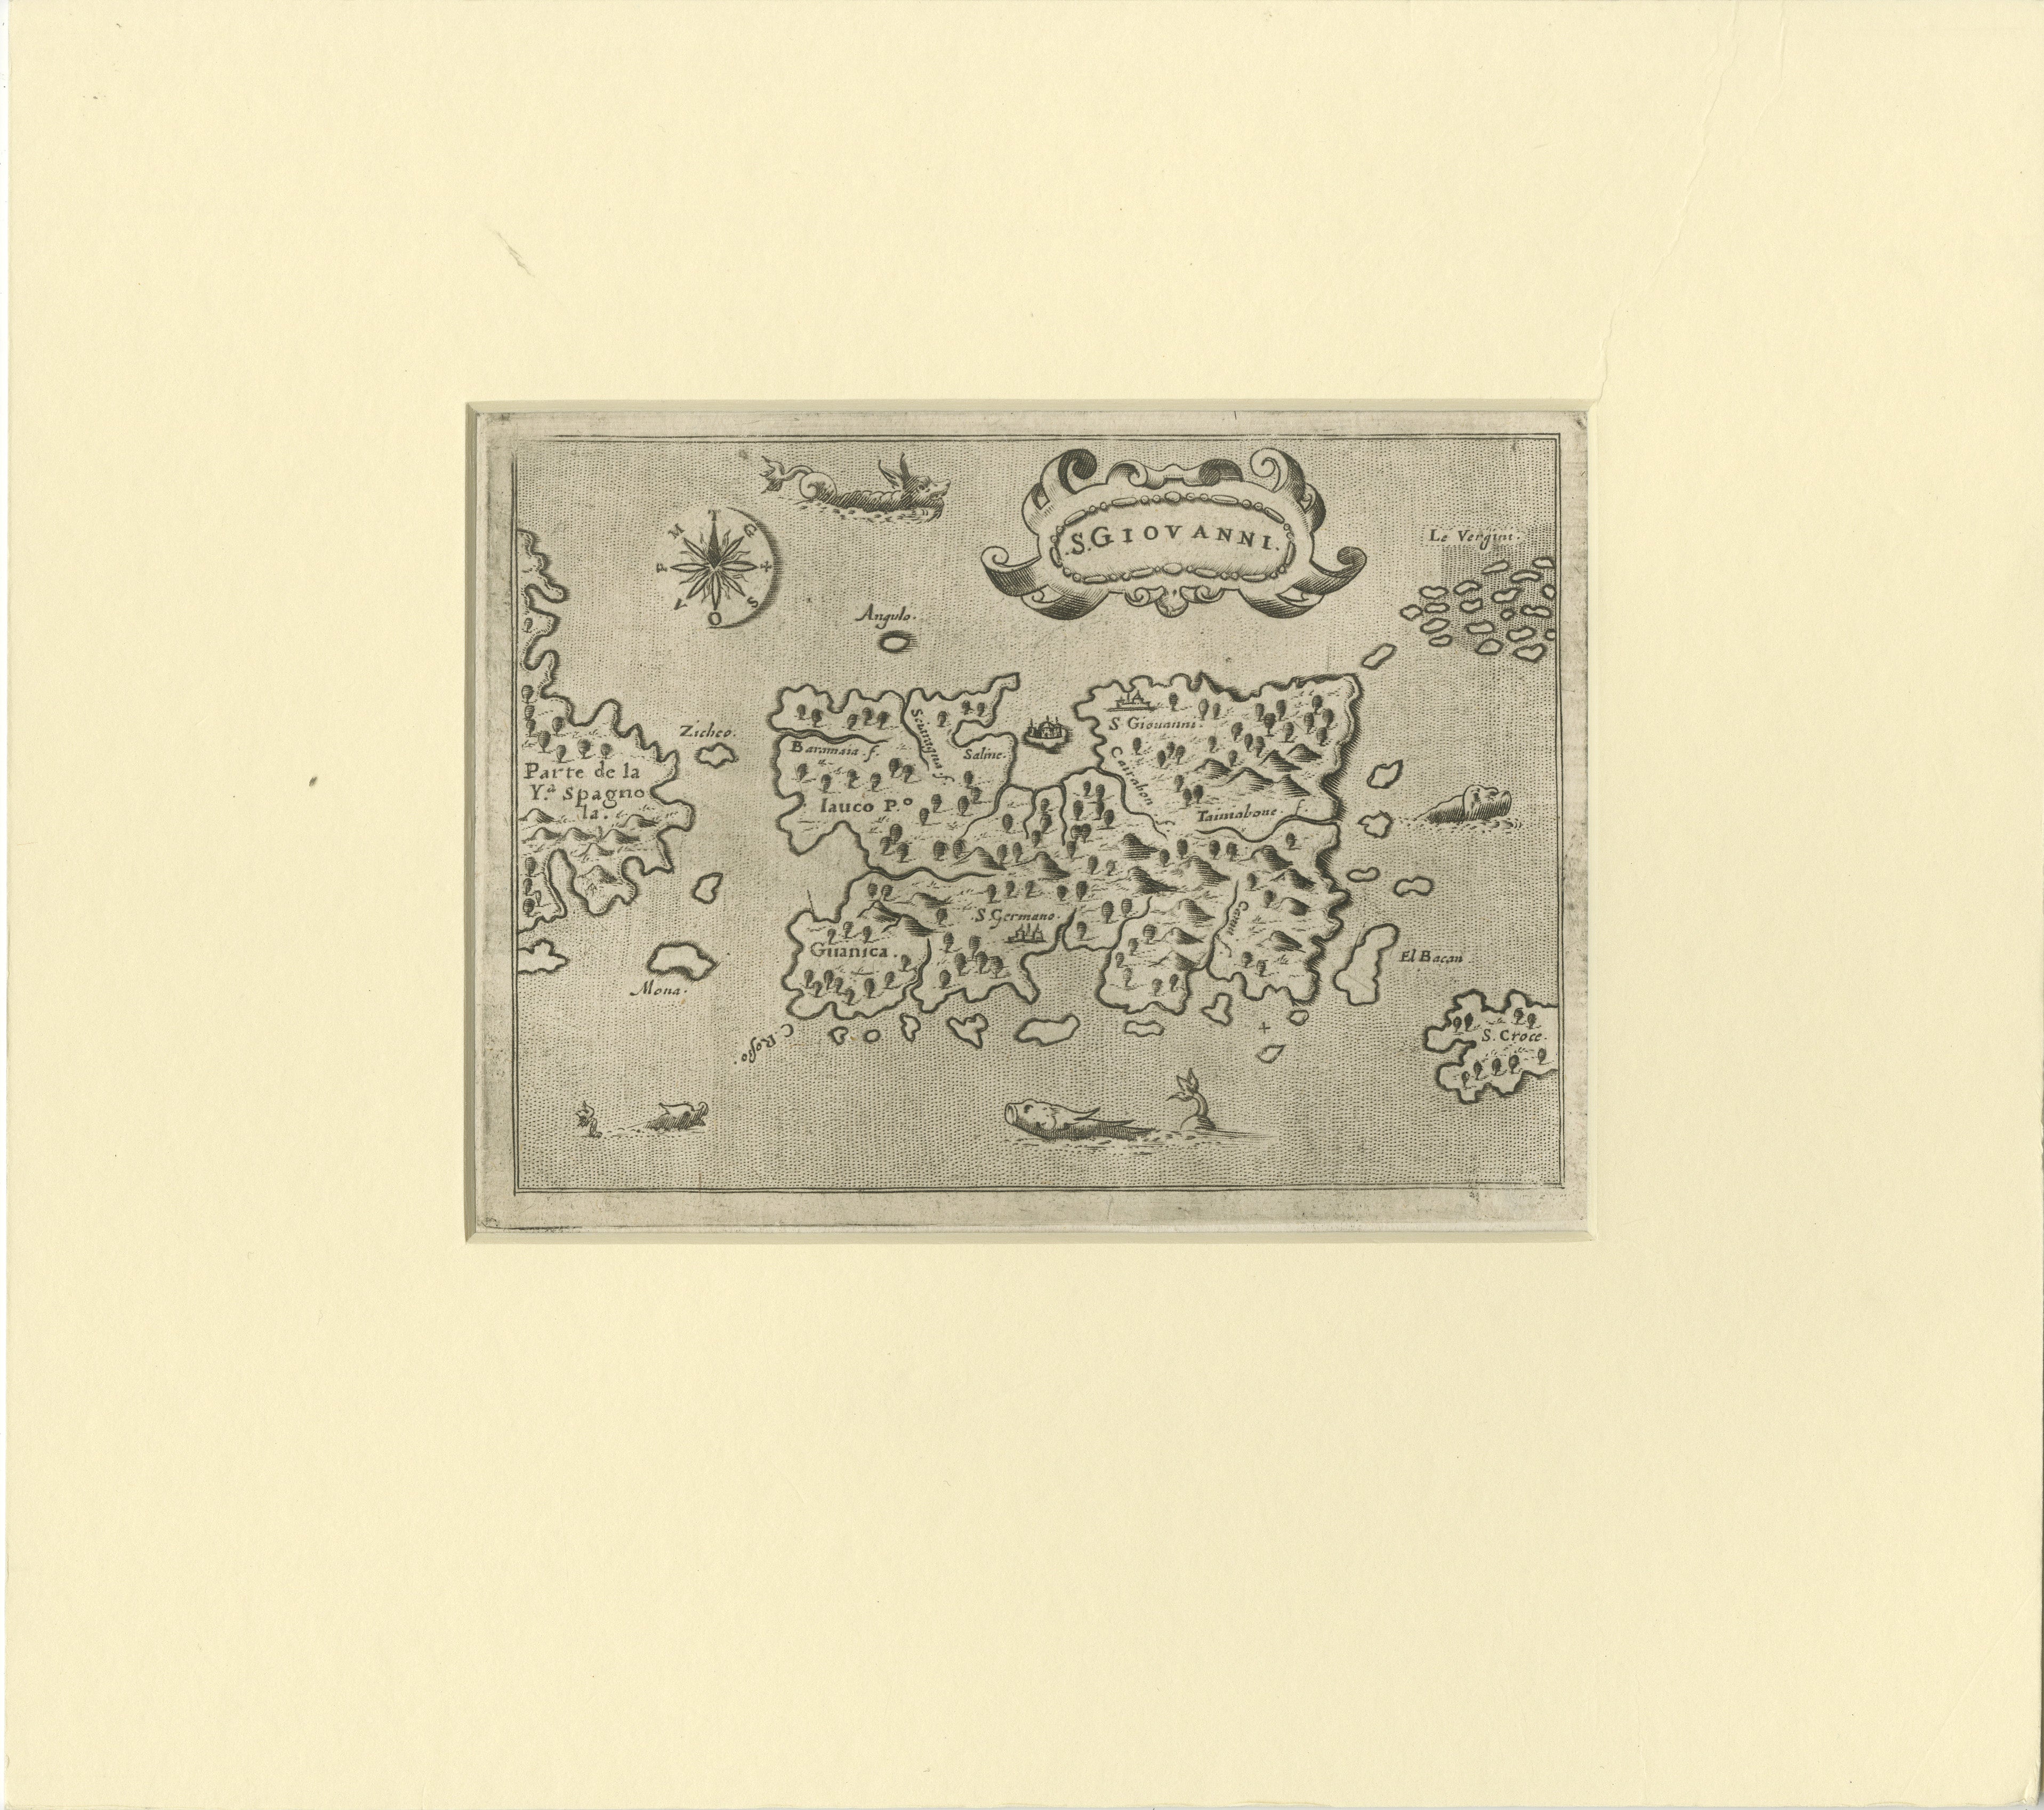 Title: S.Giovanni
Publication Info: Venice
Date: 1572
Place created: Venice

Marvelous example of Porcacchi's map of the Island of Puerto Rico. One of the earliest obtainable maps of the Island and one of the few published in the 16th Century.